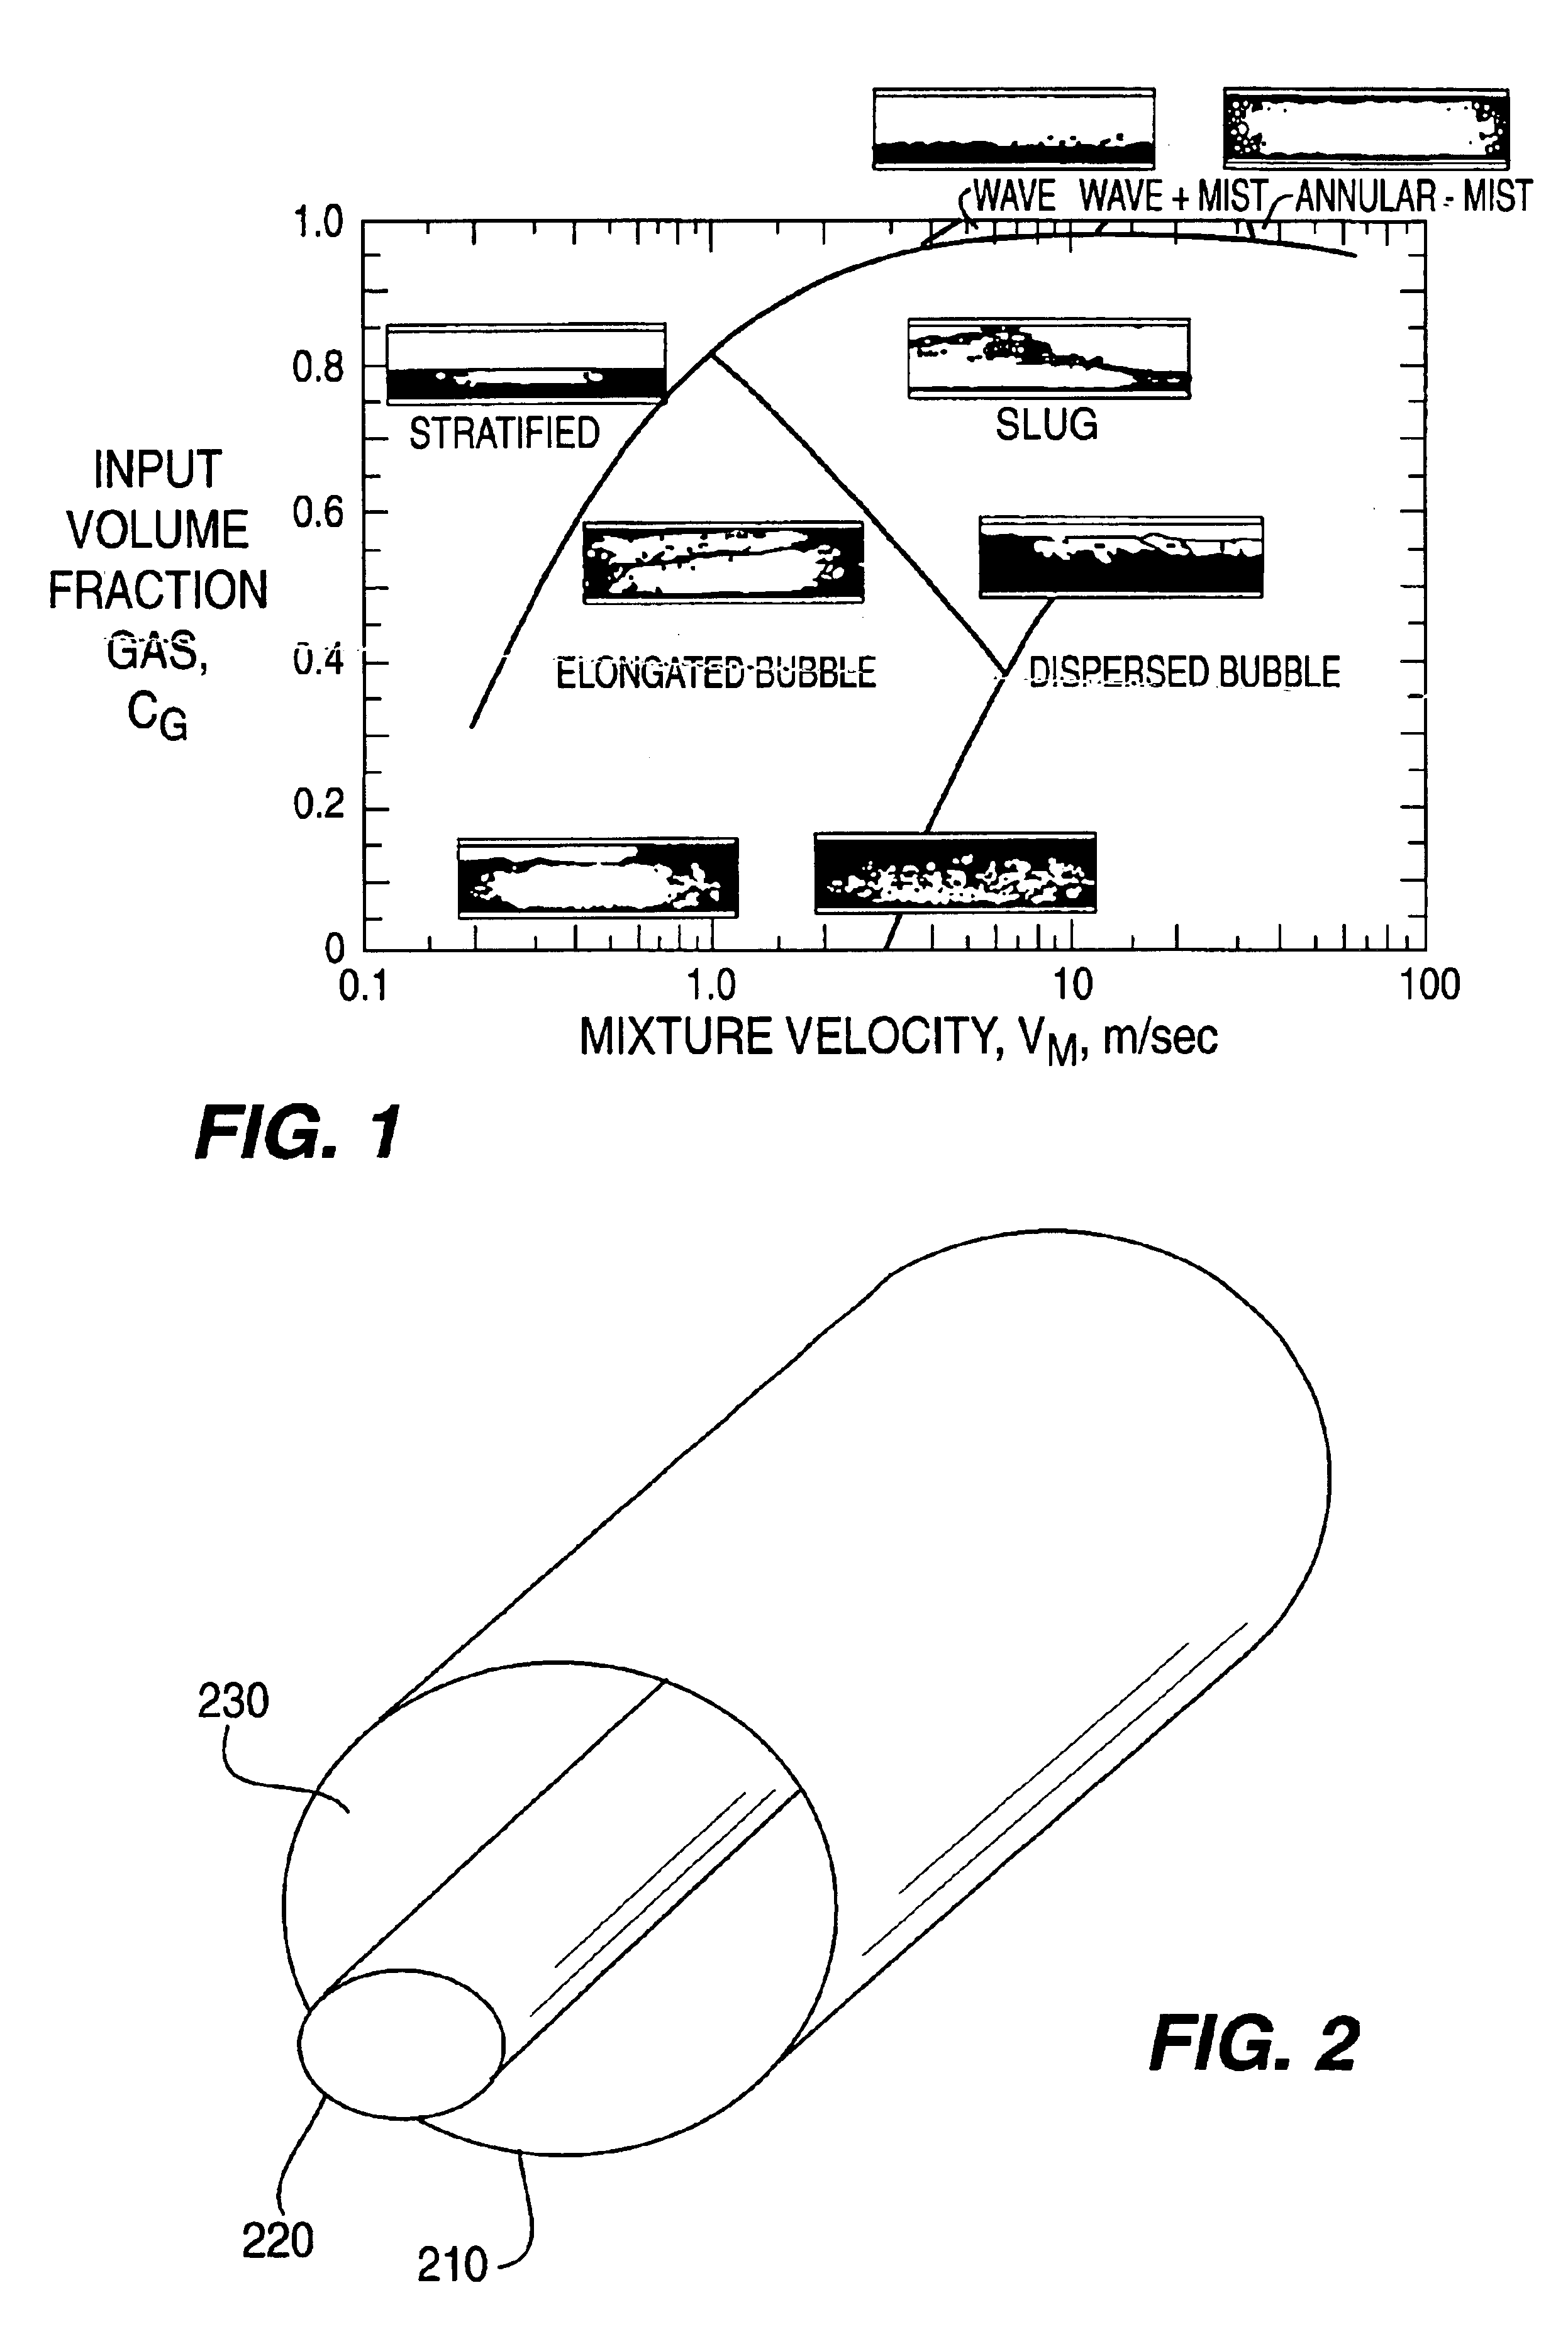 Method of cleaning passageways using a mixed phase flow of a gas and a liquid